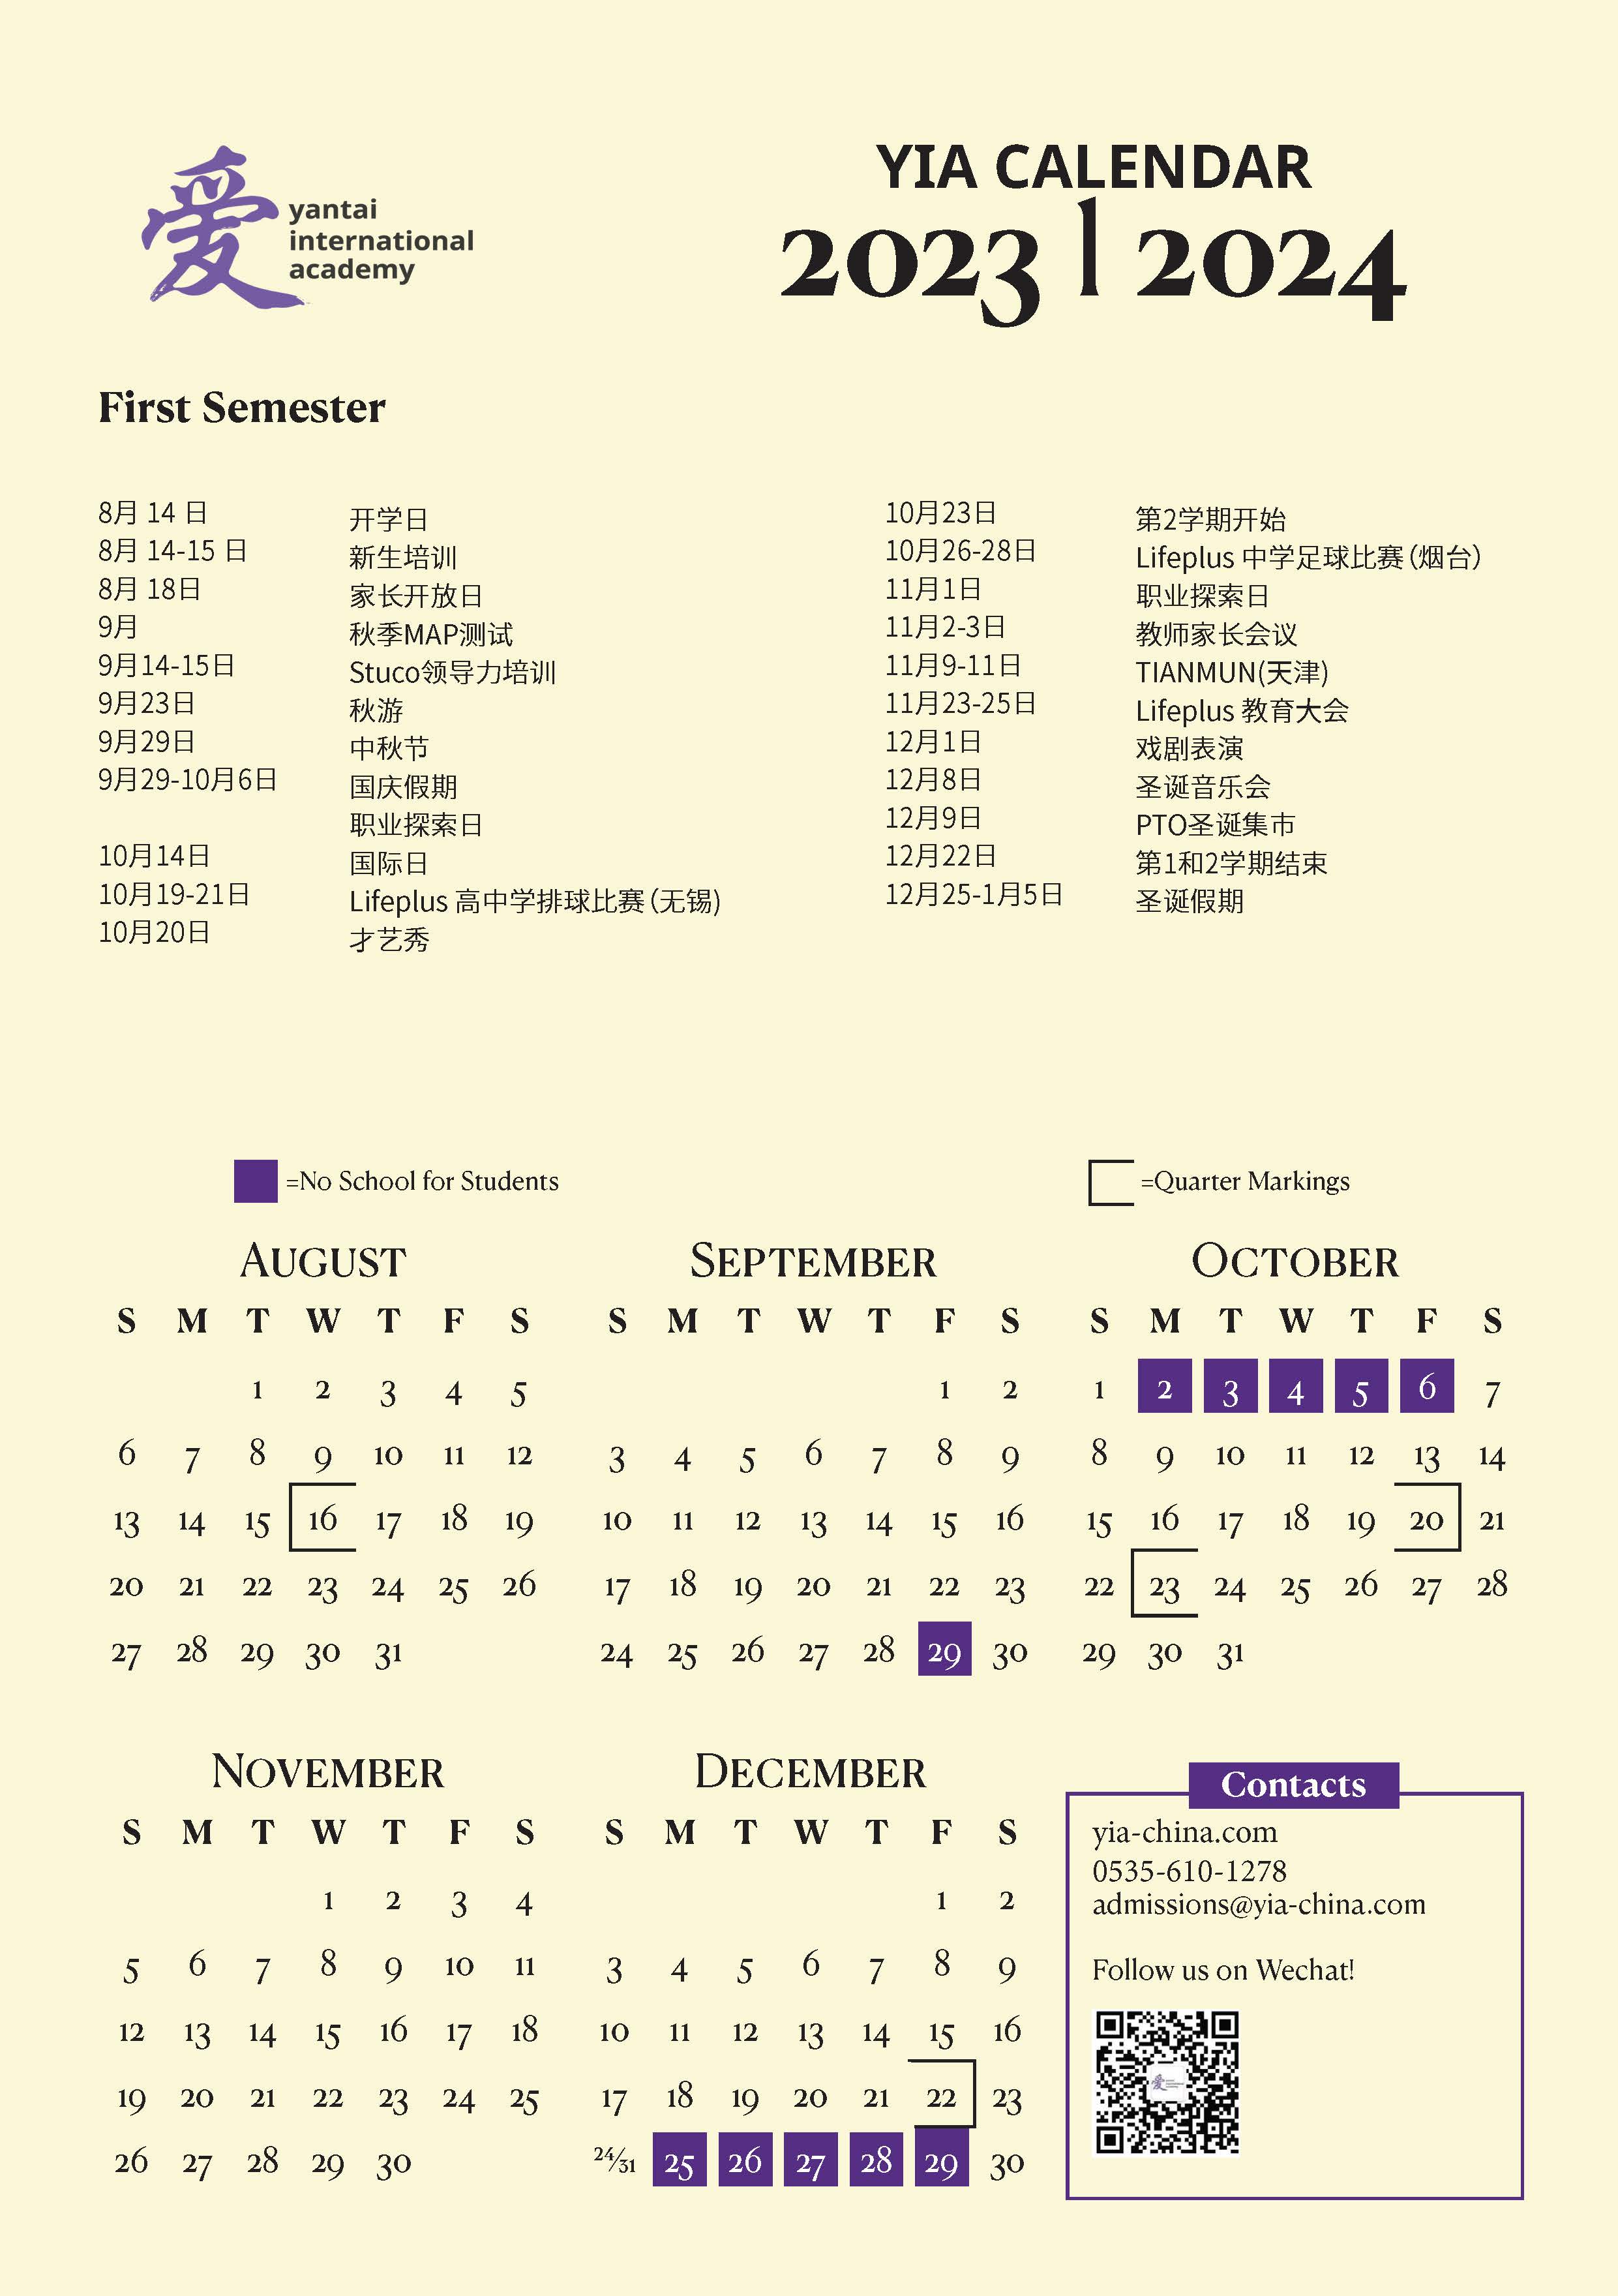 YIA%20Calendar%202023-2024_Chinese_Page_1